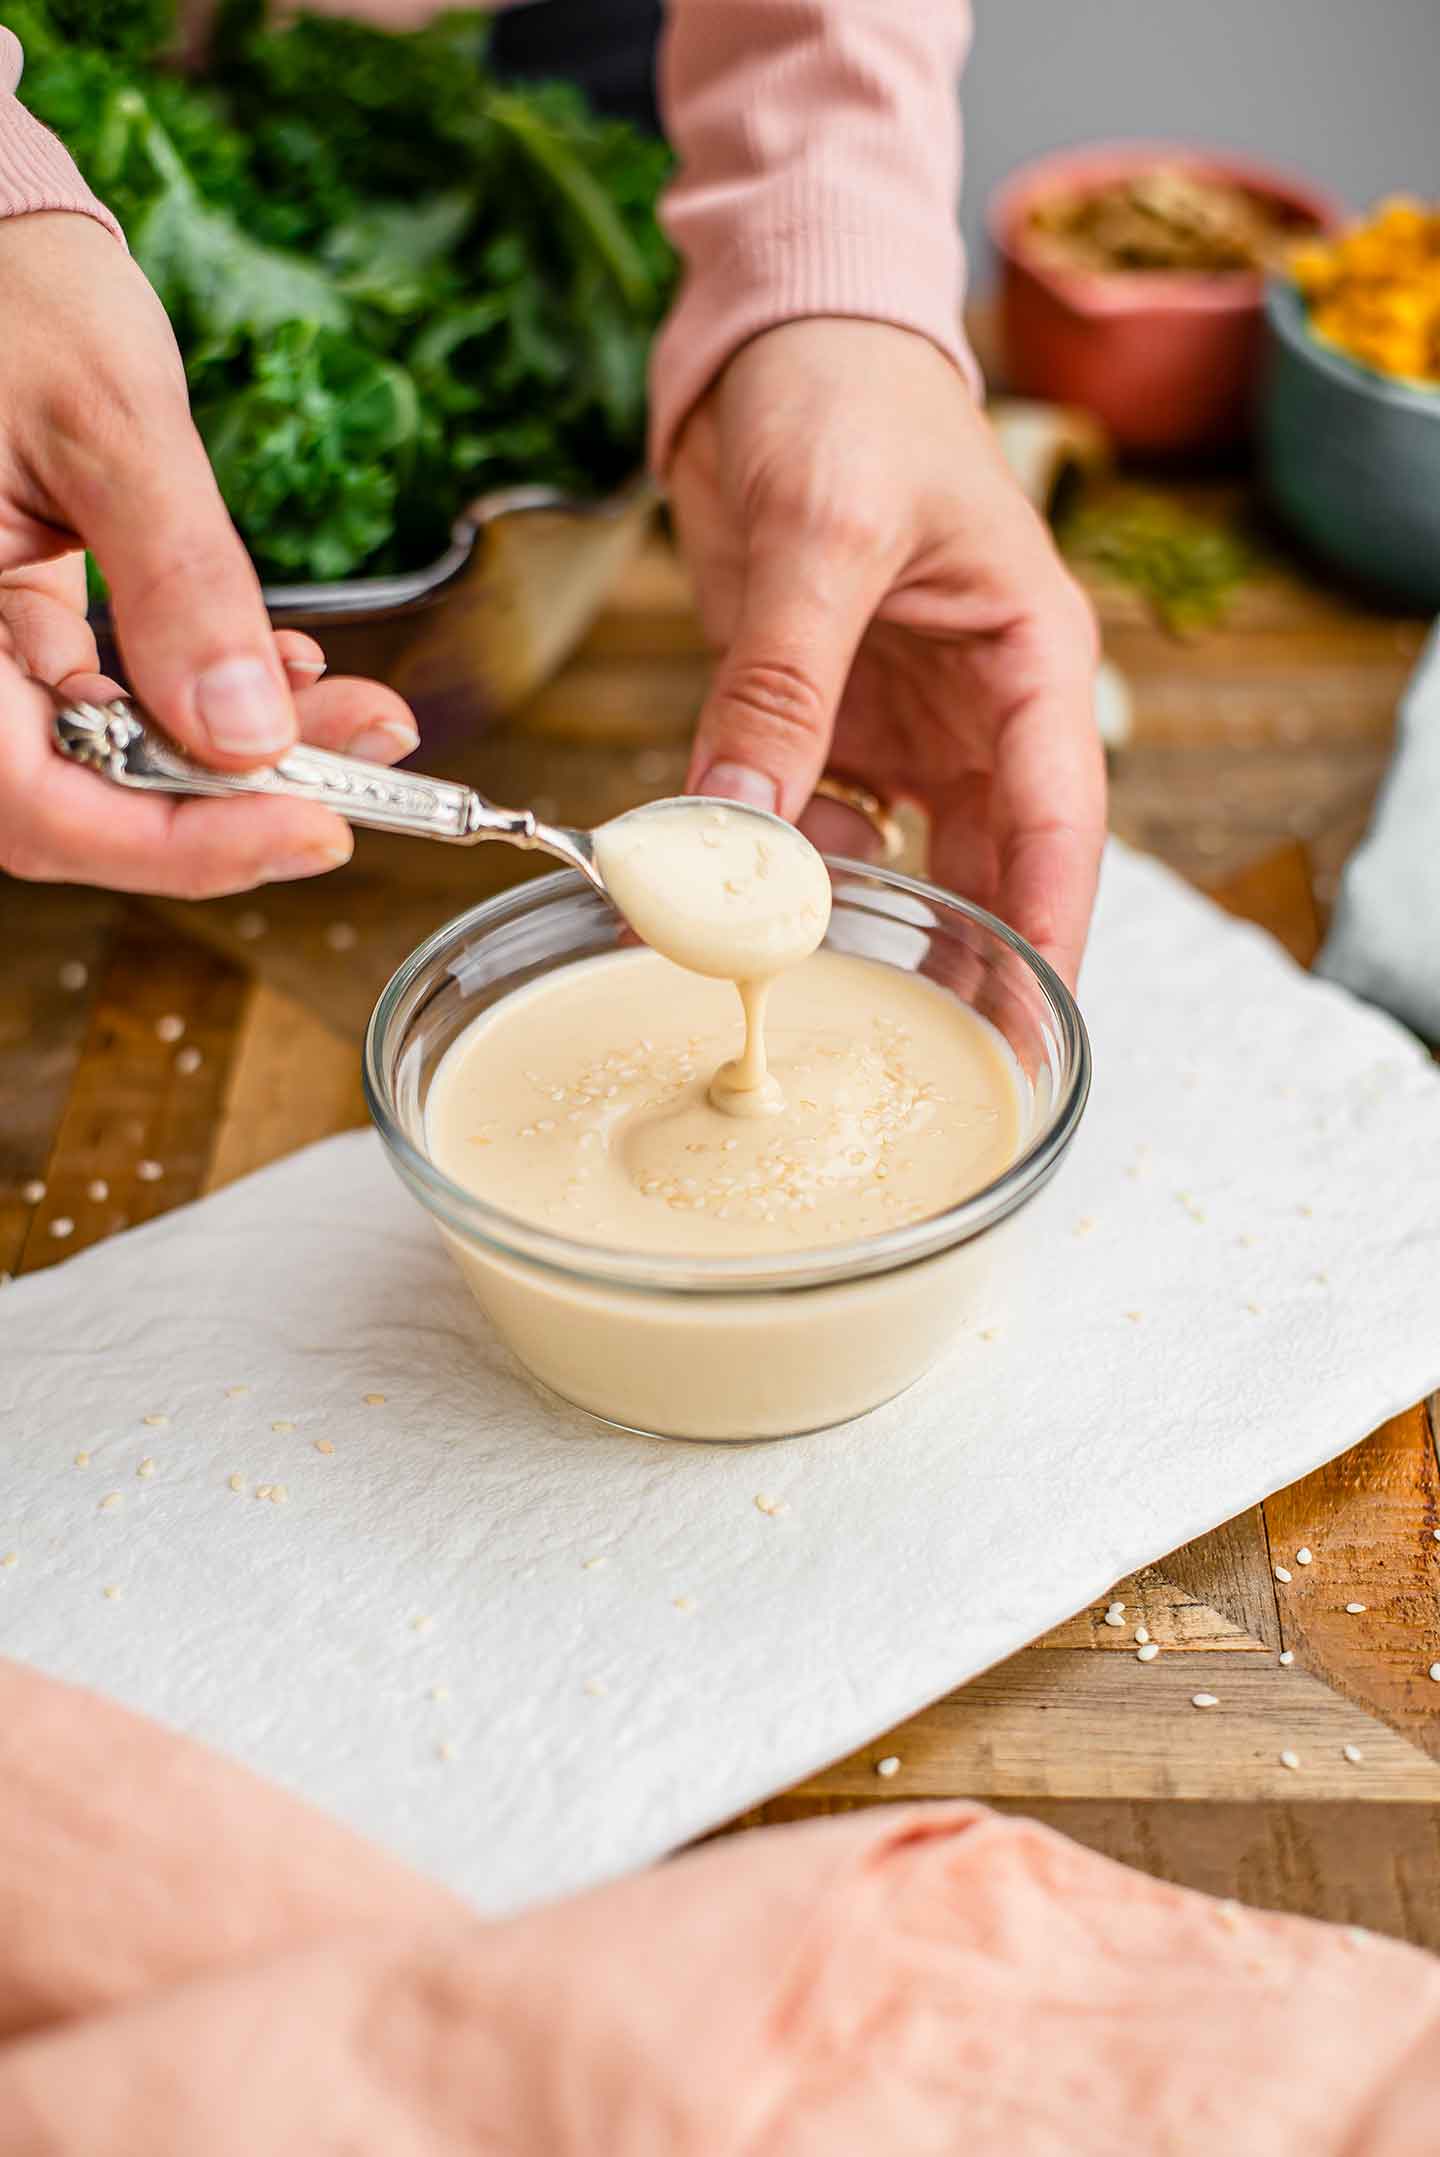 Side view of a hand lifting a spoon of creamy lemon tahini dressing from a small bowl. The dressing is thick but pourable and garnished with sesame seeds.